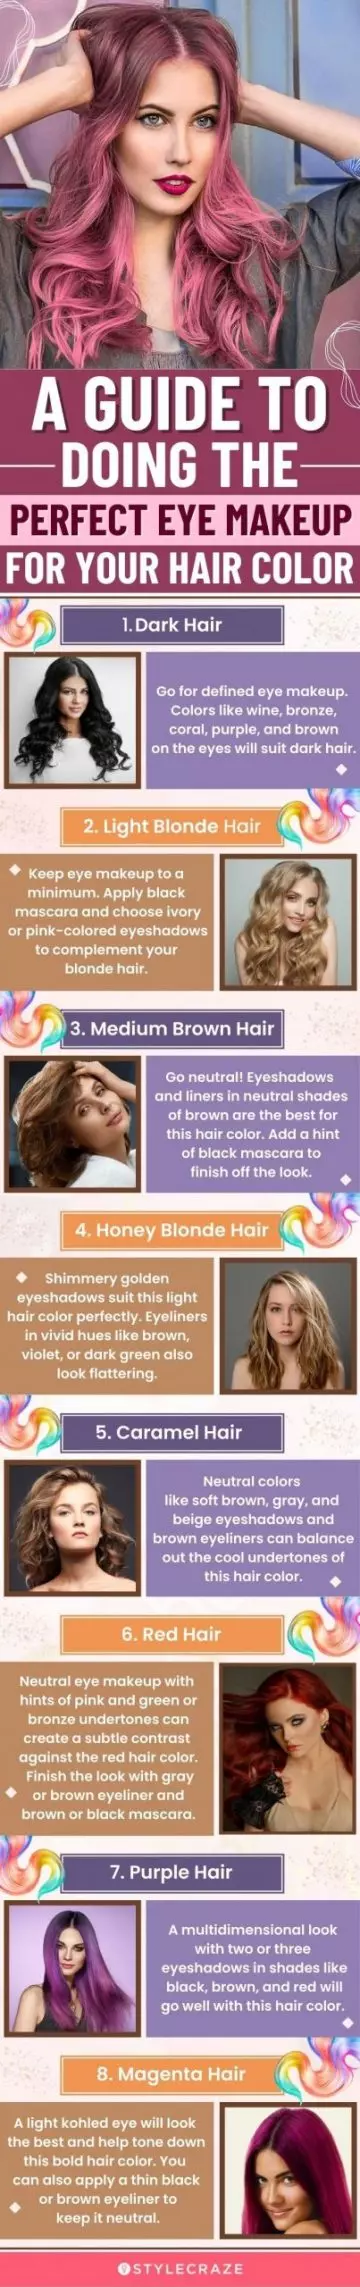 a guide to doing the perfect eye makeup for your hair color (infographic)